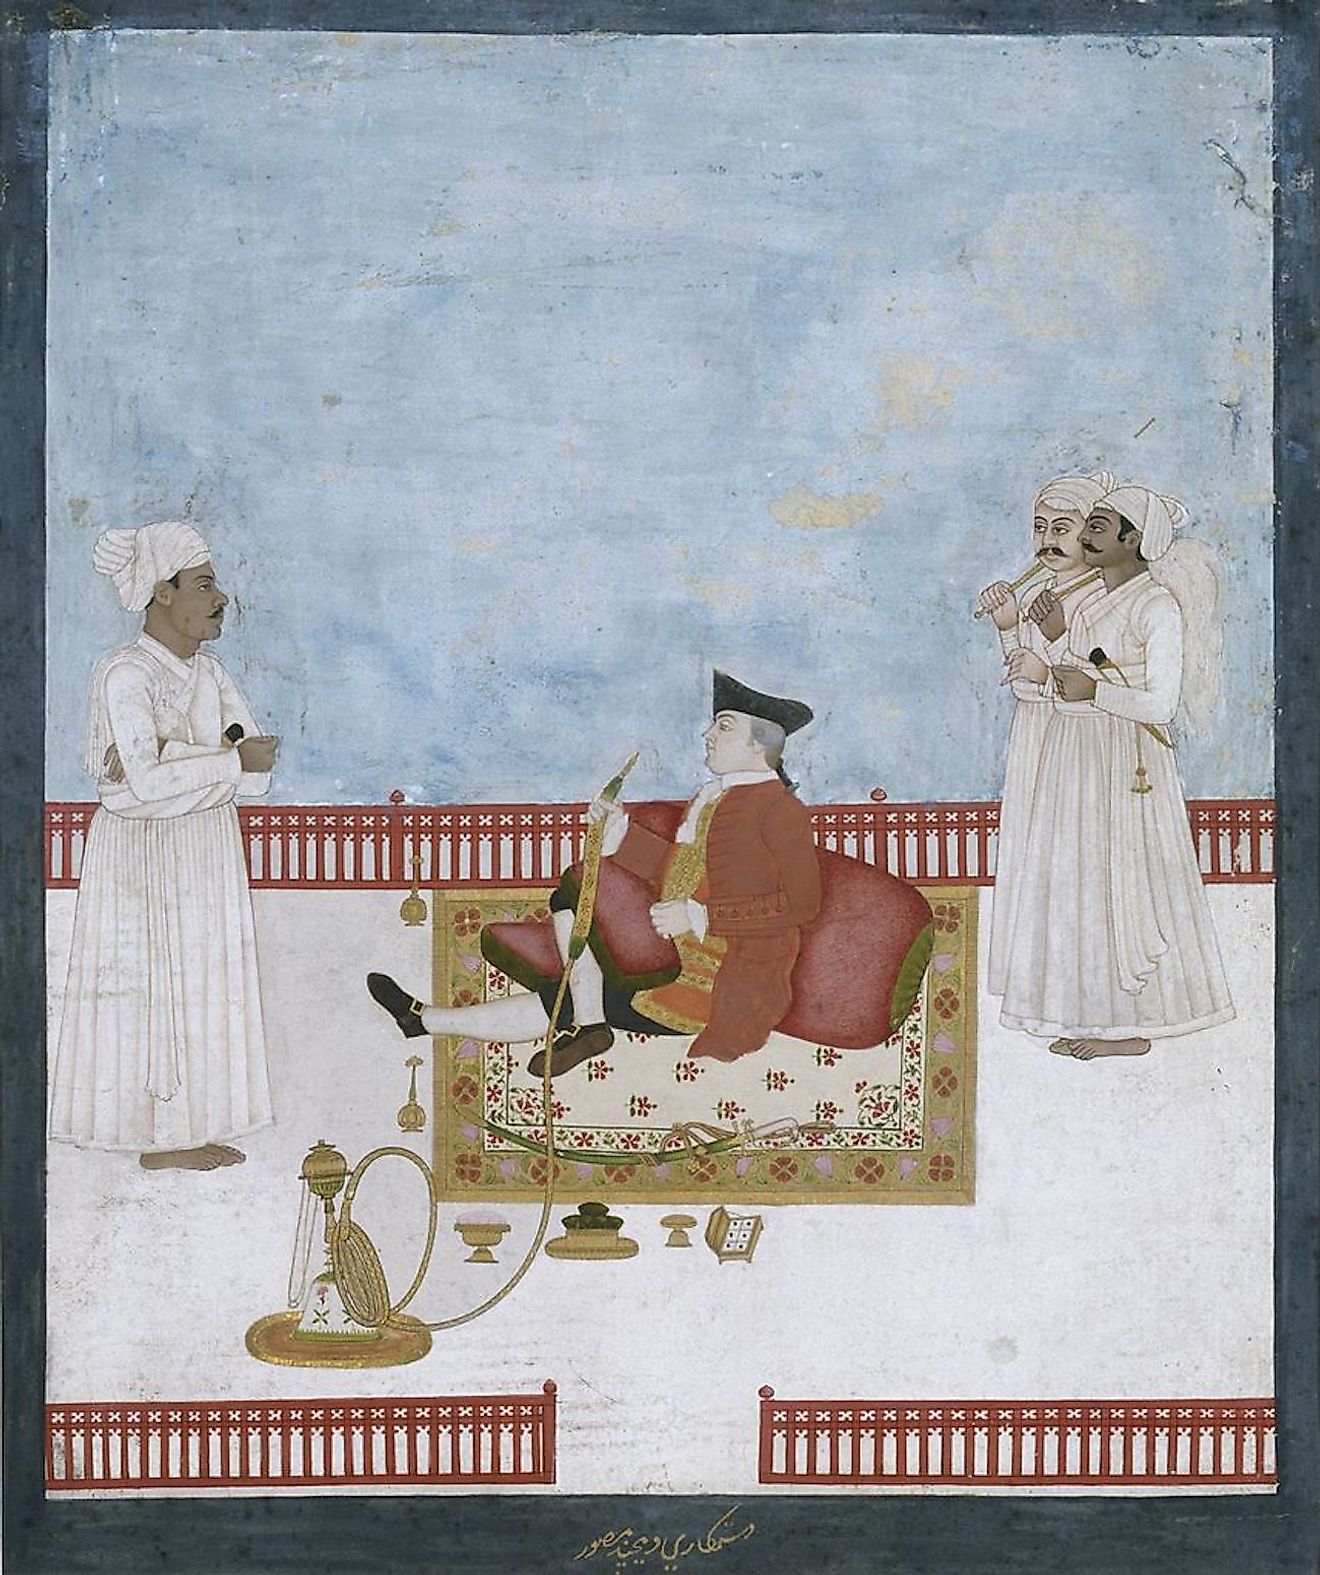 Company painting depicting an official of the East India Company in India, c. 1760.